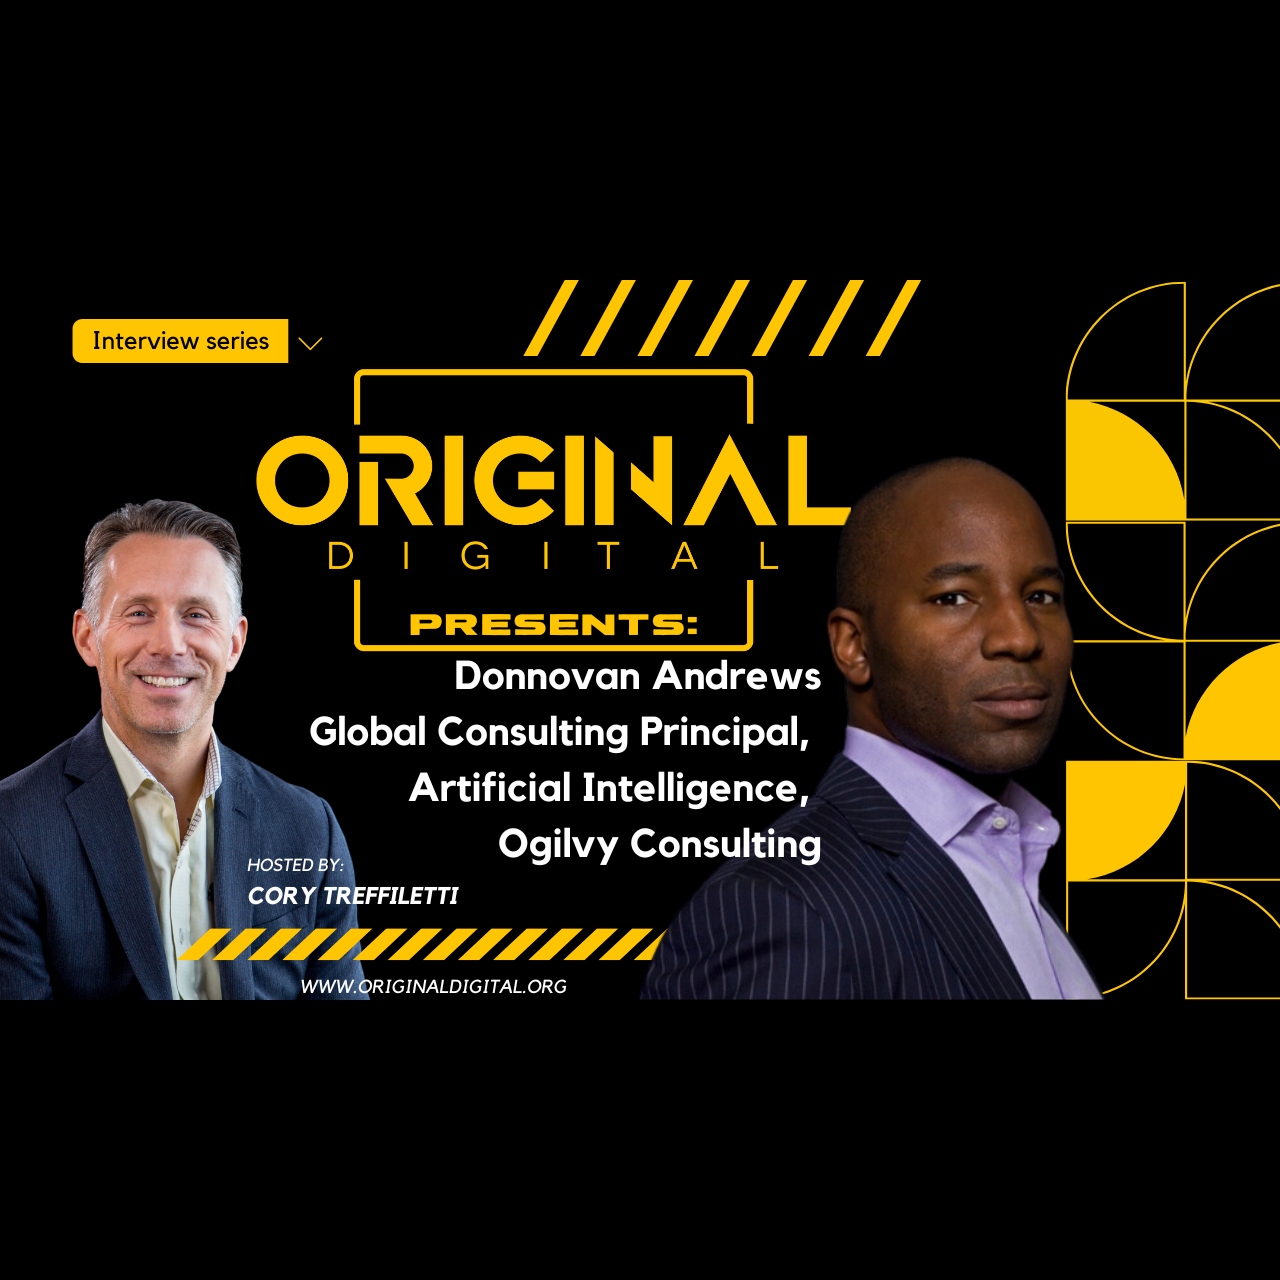 Cover image for  article: Original Digital Presents: Donnovan Andrews, Global Consulting Principal, A.I., Ogilvy Consulting (Video)